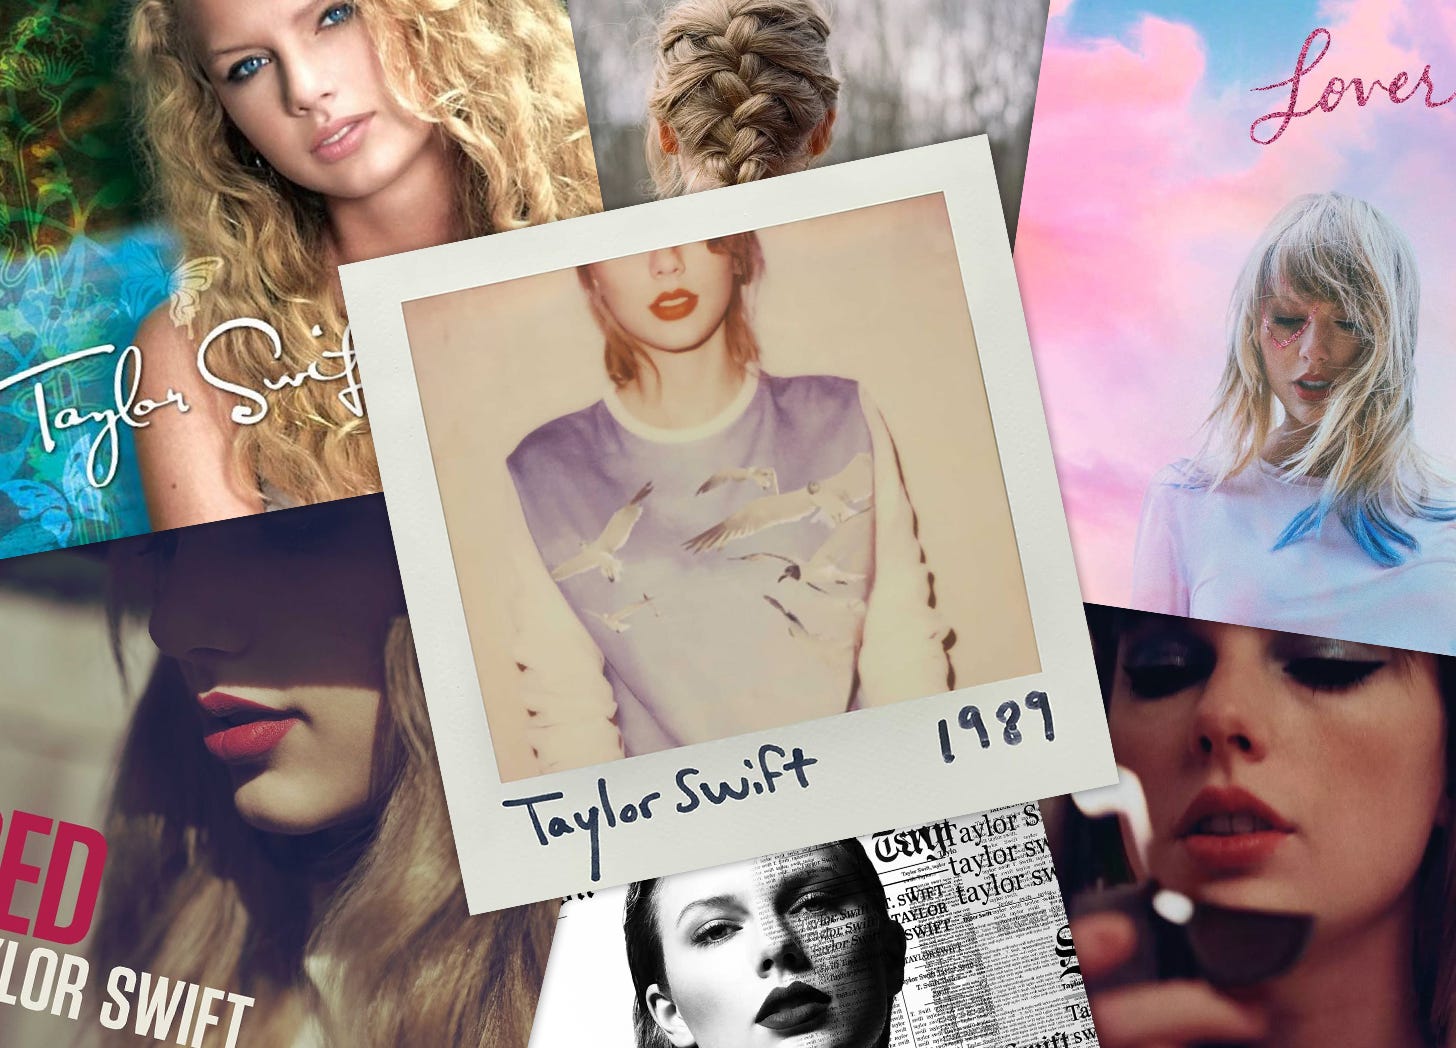 A collage of Taylor Swift's album covers, with 1989 prominently in the center. 